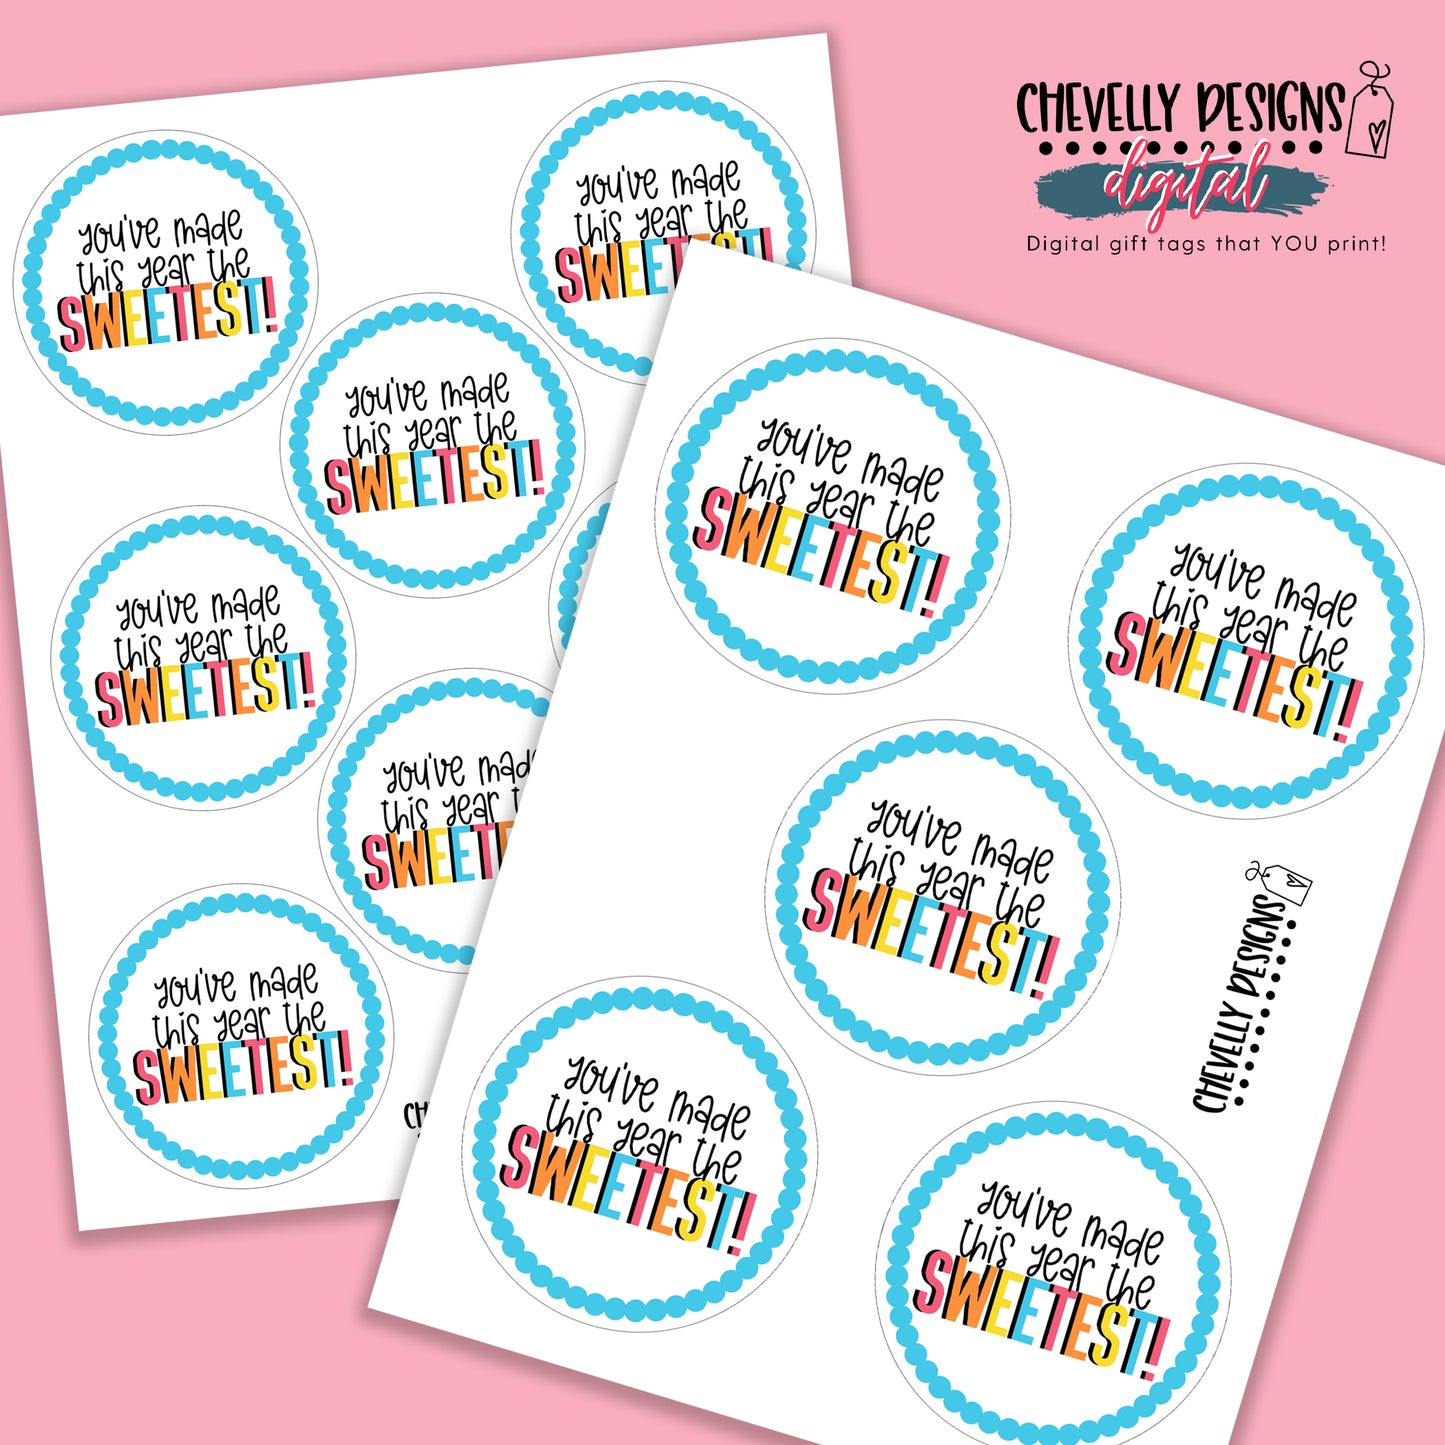 Printable Gift Tags - You've Made This Year The Sweetest >>>Instant Digital Download<<<